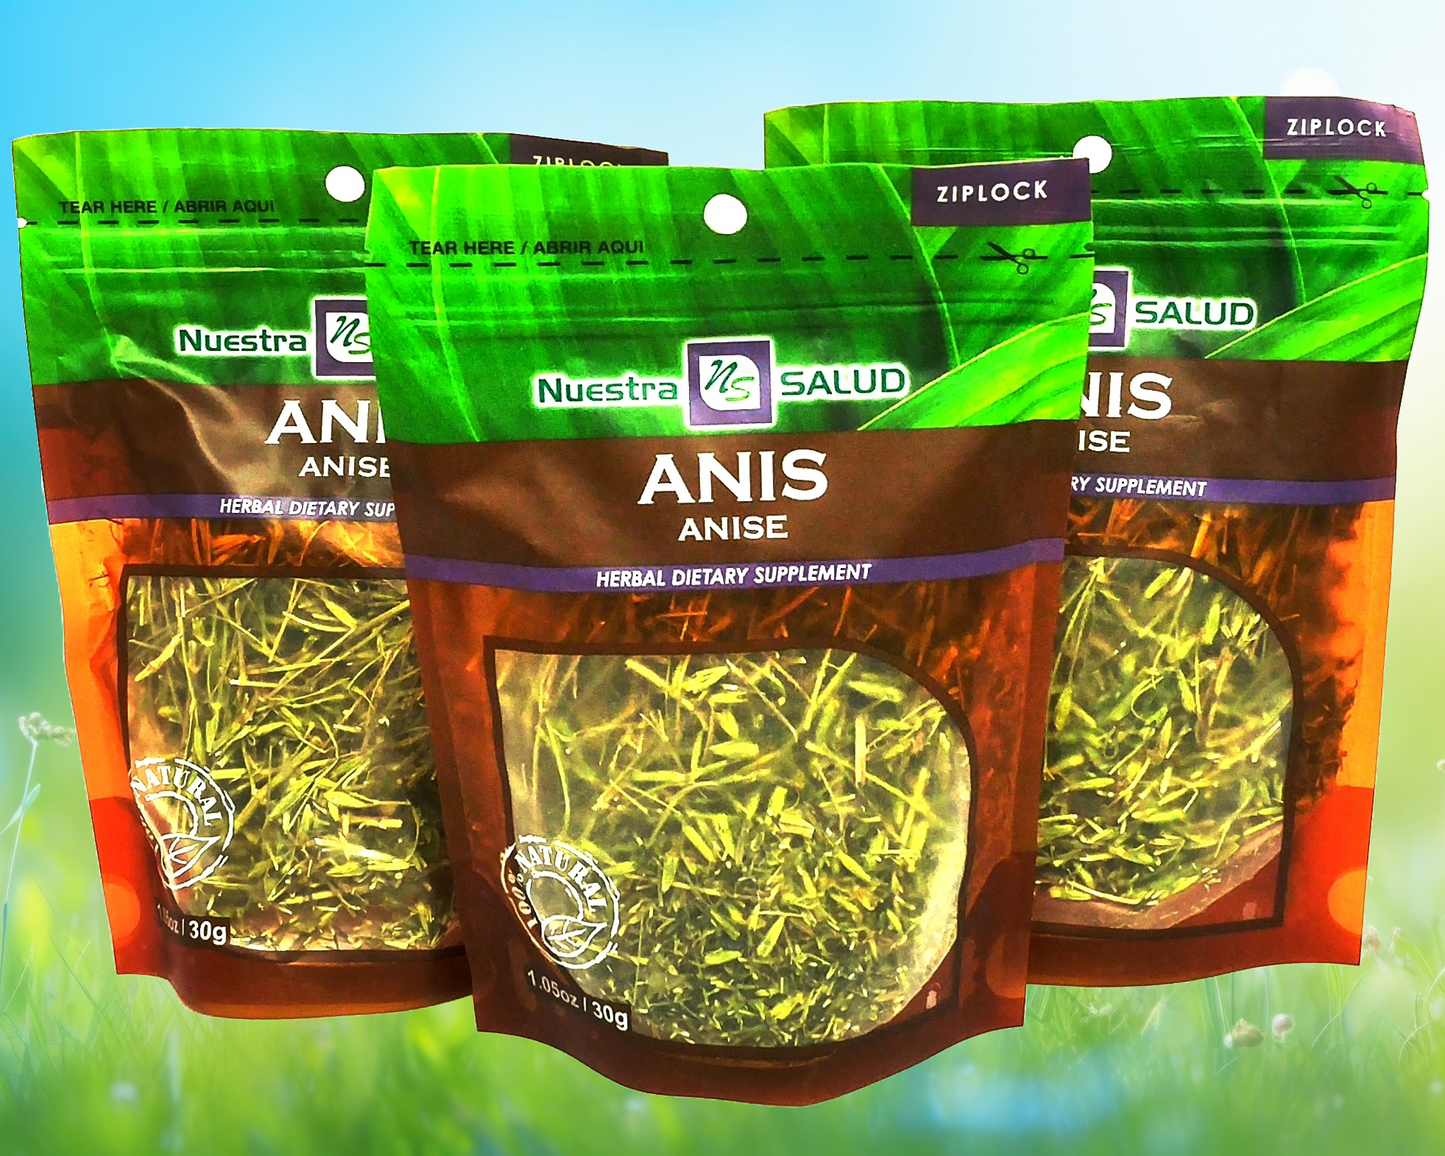 Anise Tea Anis Herbal Infusion Value Pack